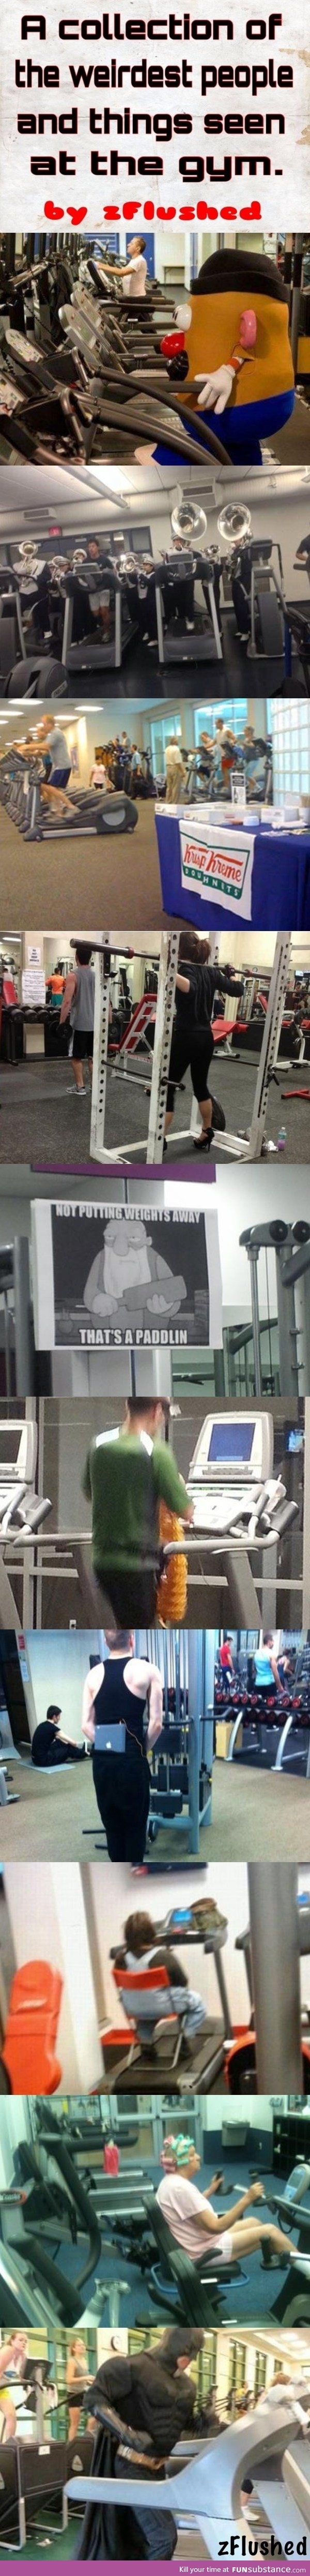 Weird stuff you see at the gym